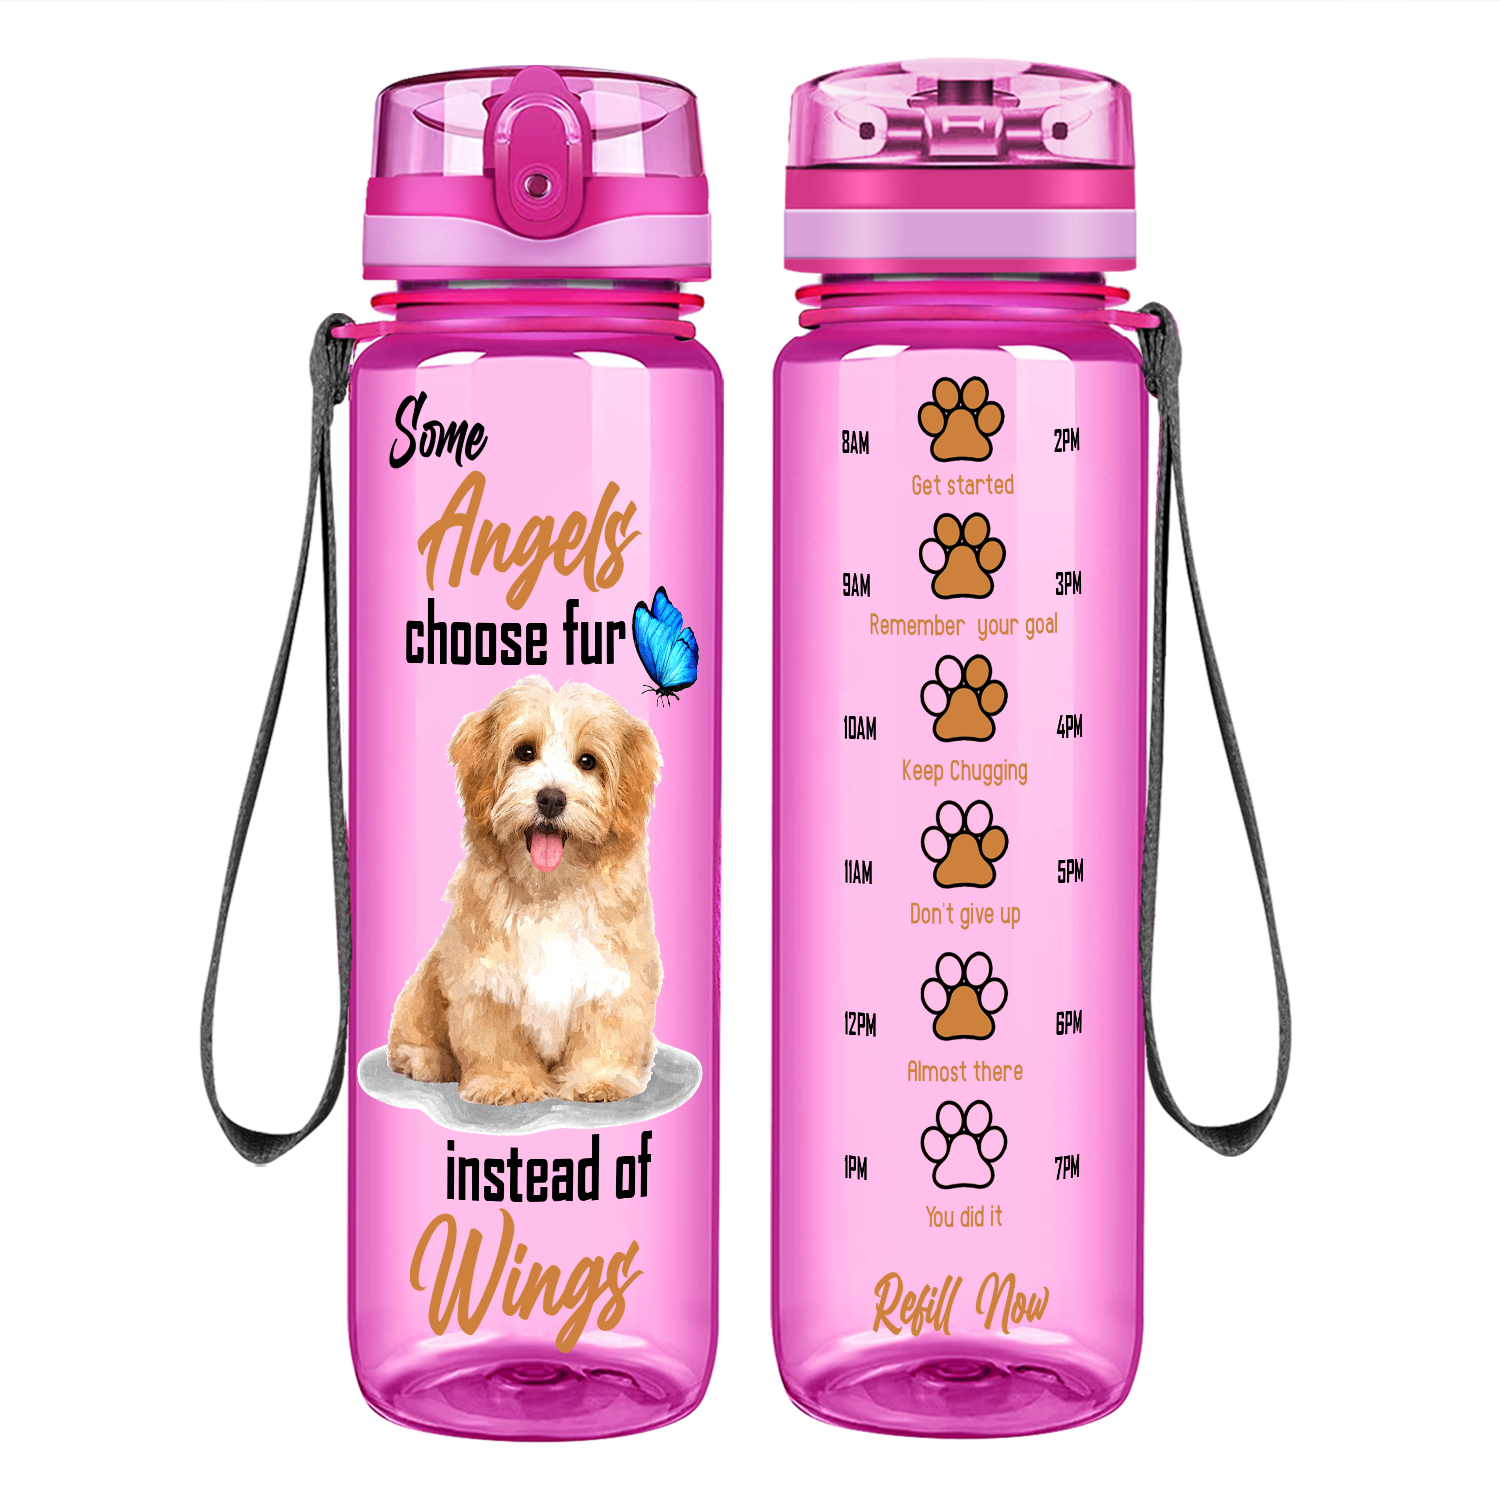 Some Angels Choose Fur Instead of Wings Golden Retriever on 32 oz Motivational Tracking Water Bottle